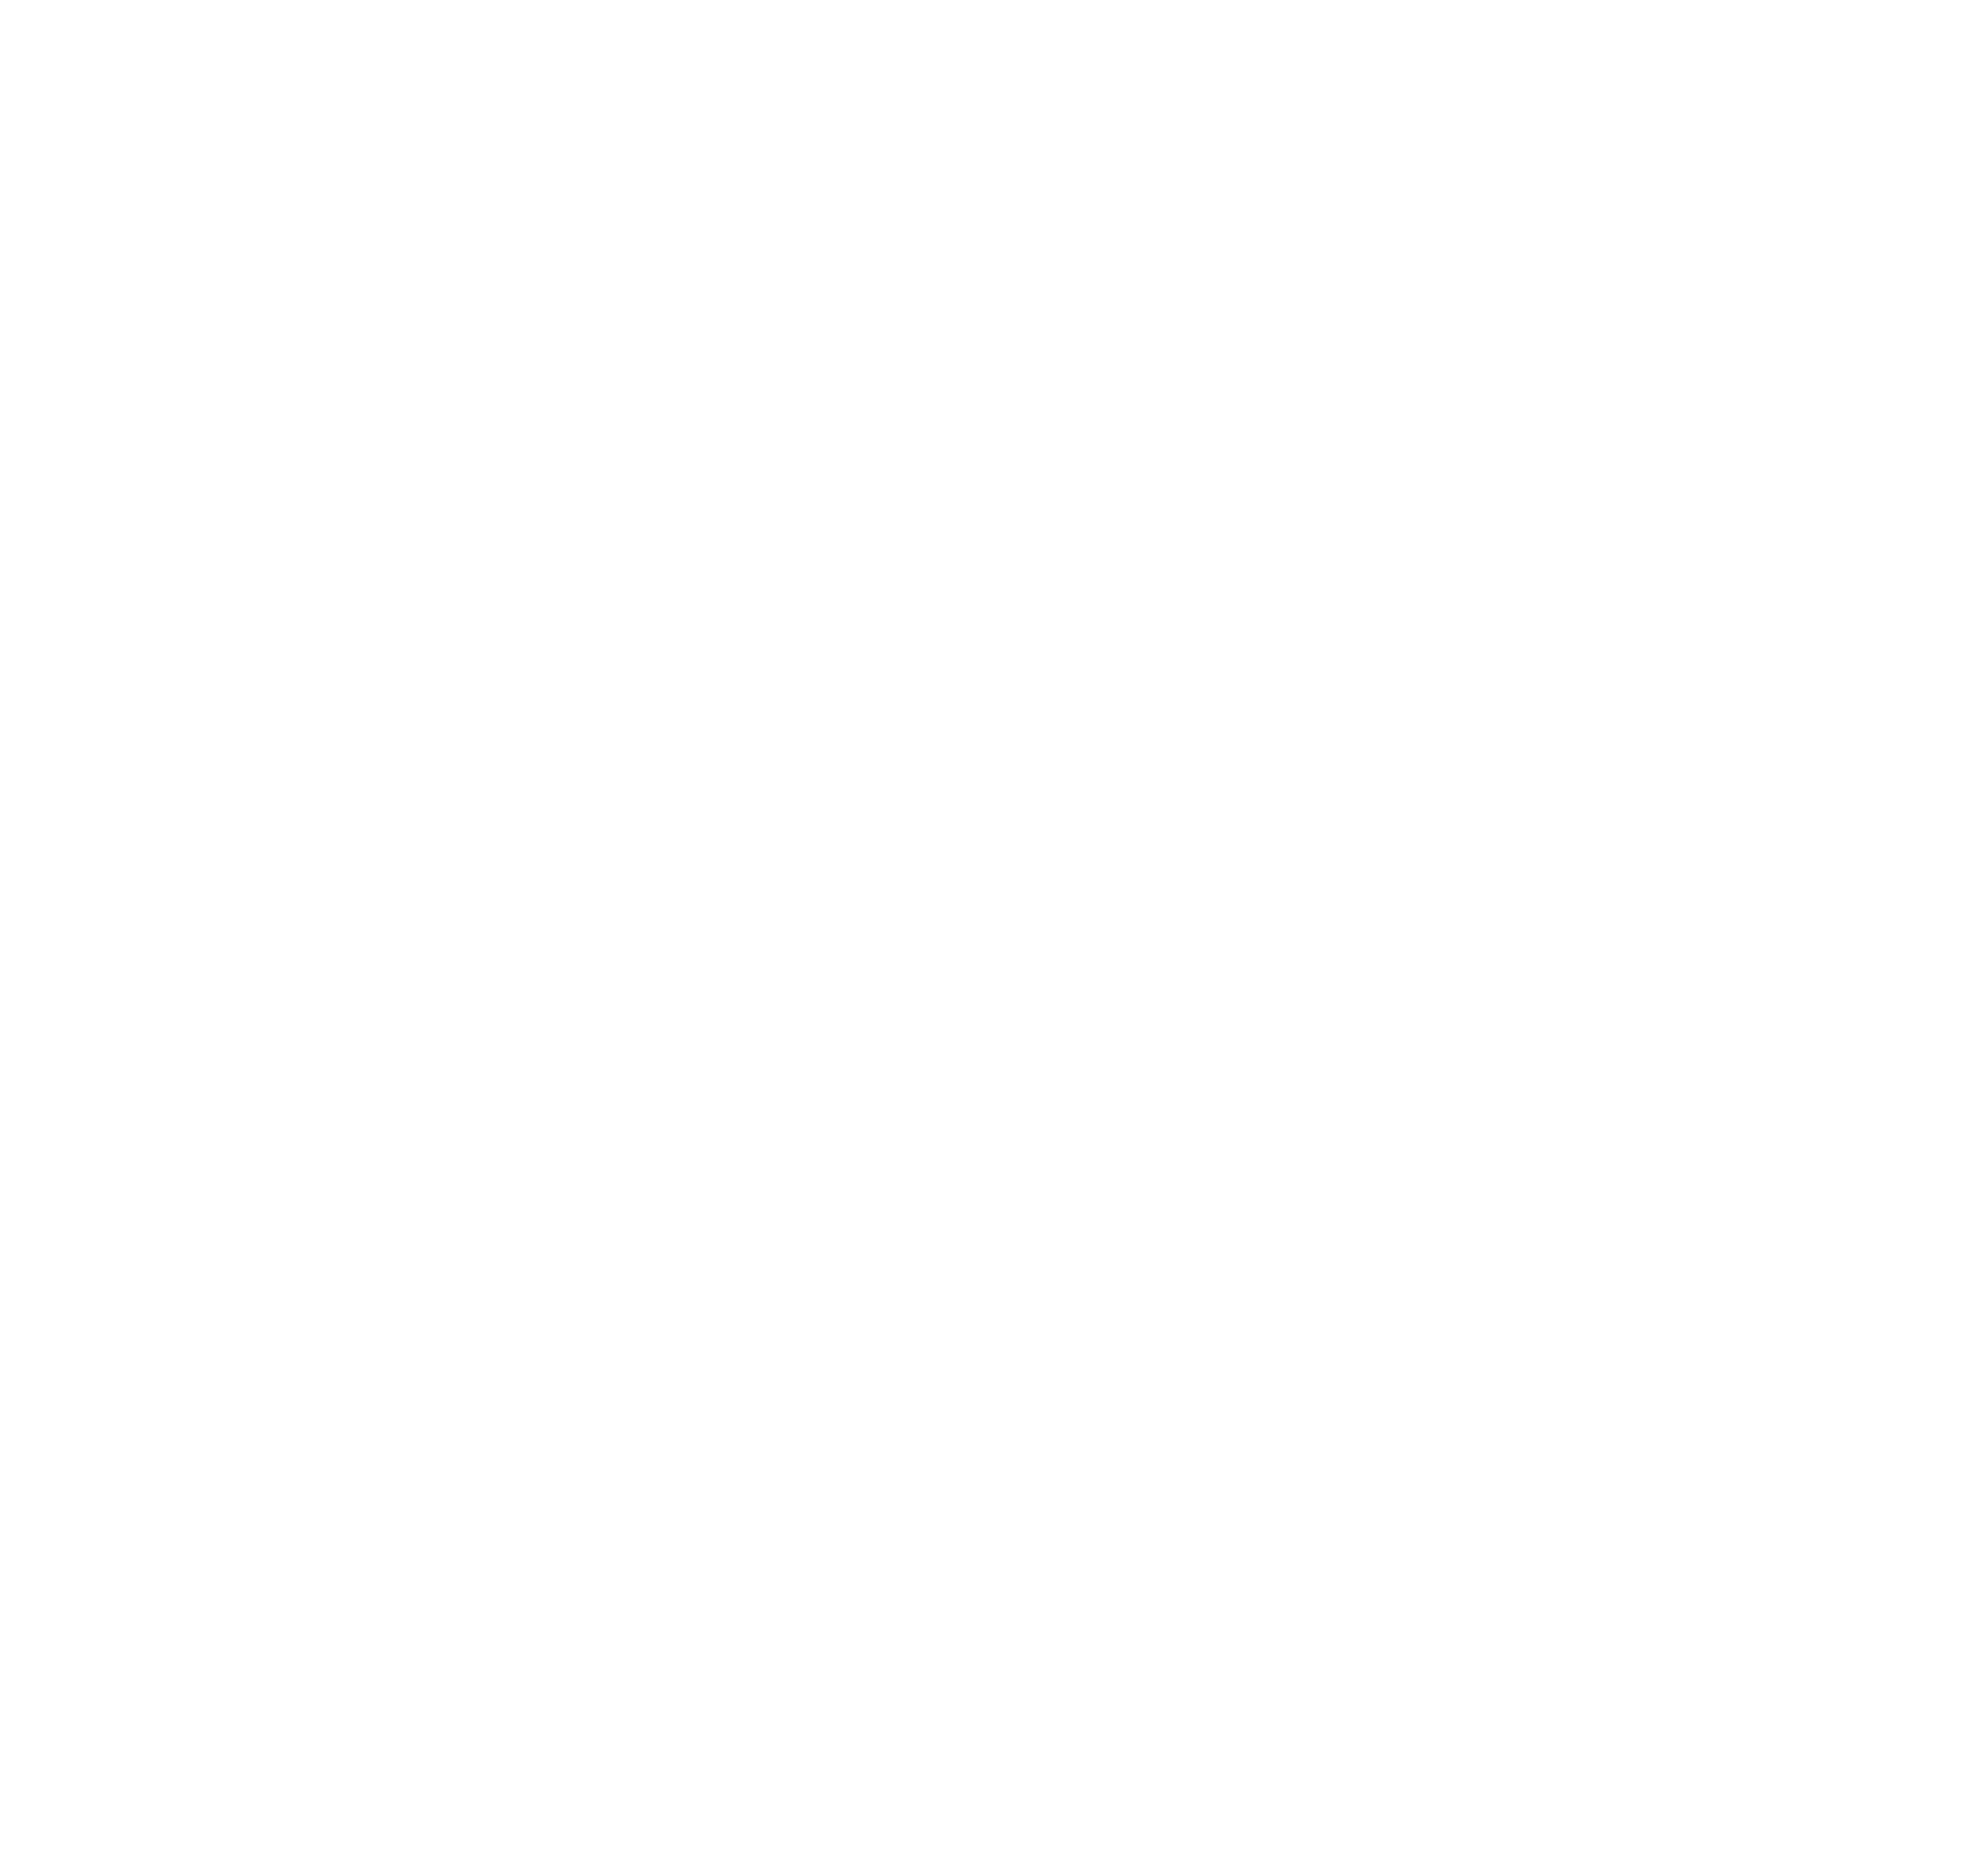 2019 Brighter Future Scholarship Pageant All Rights